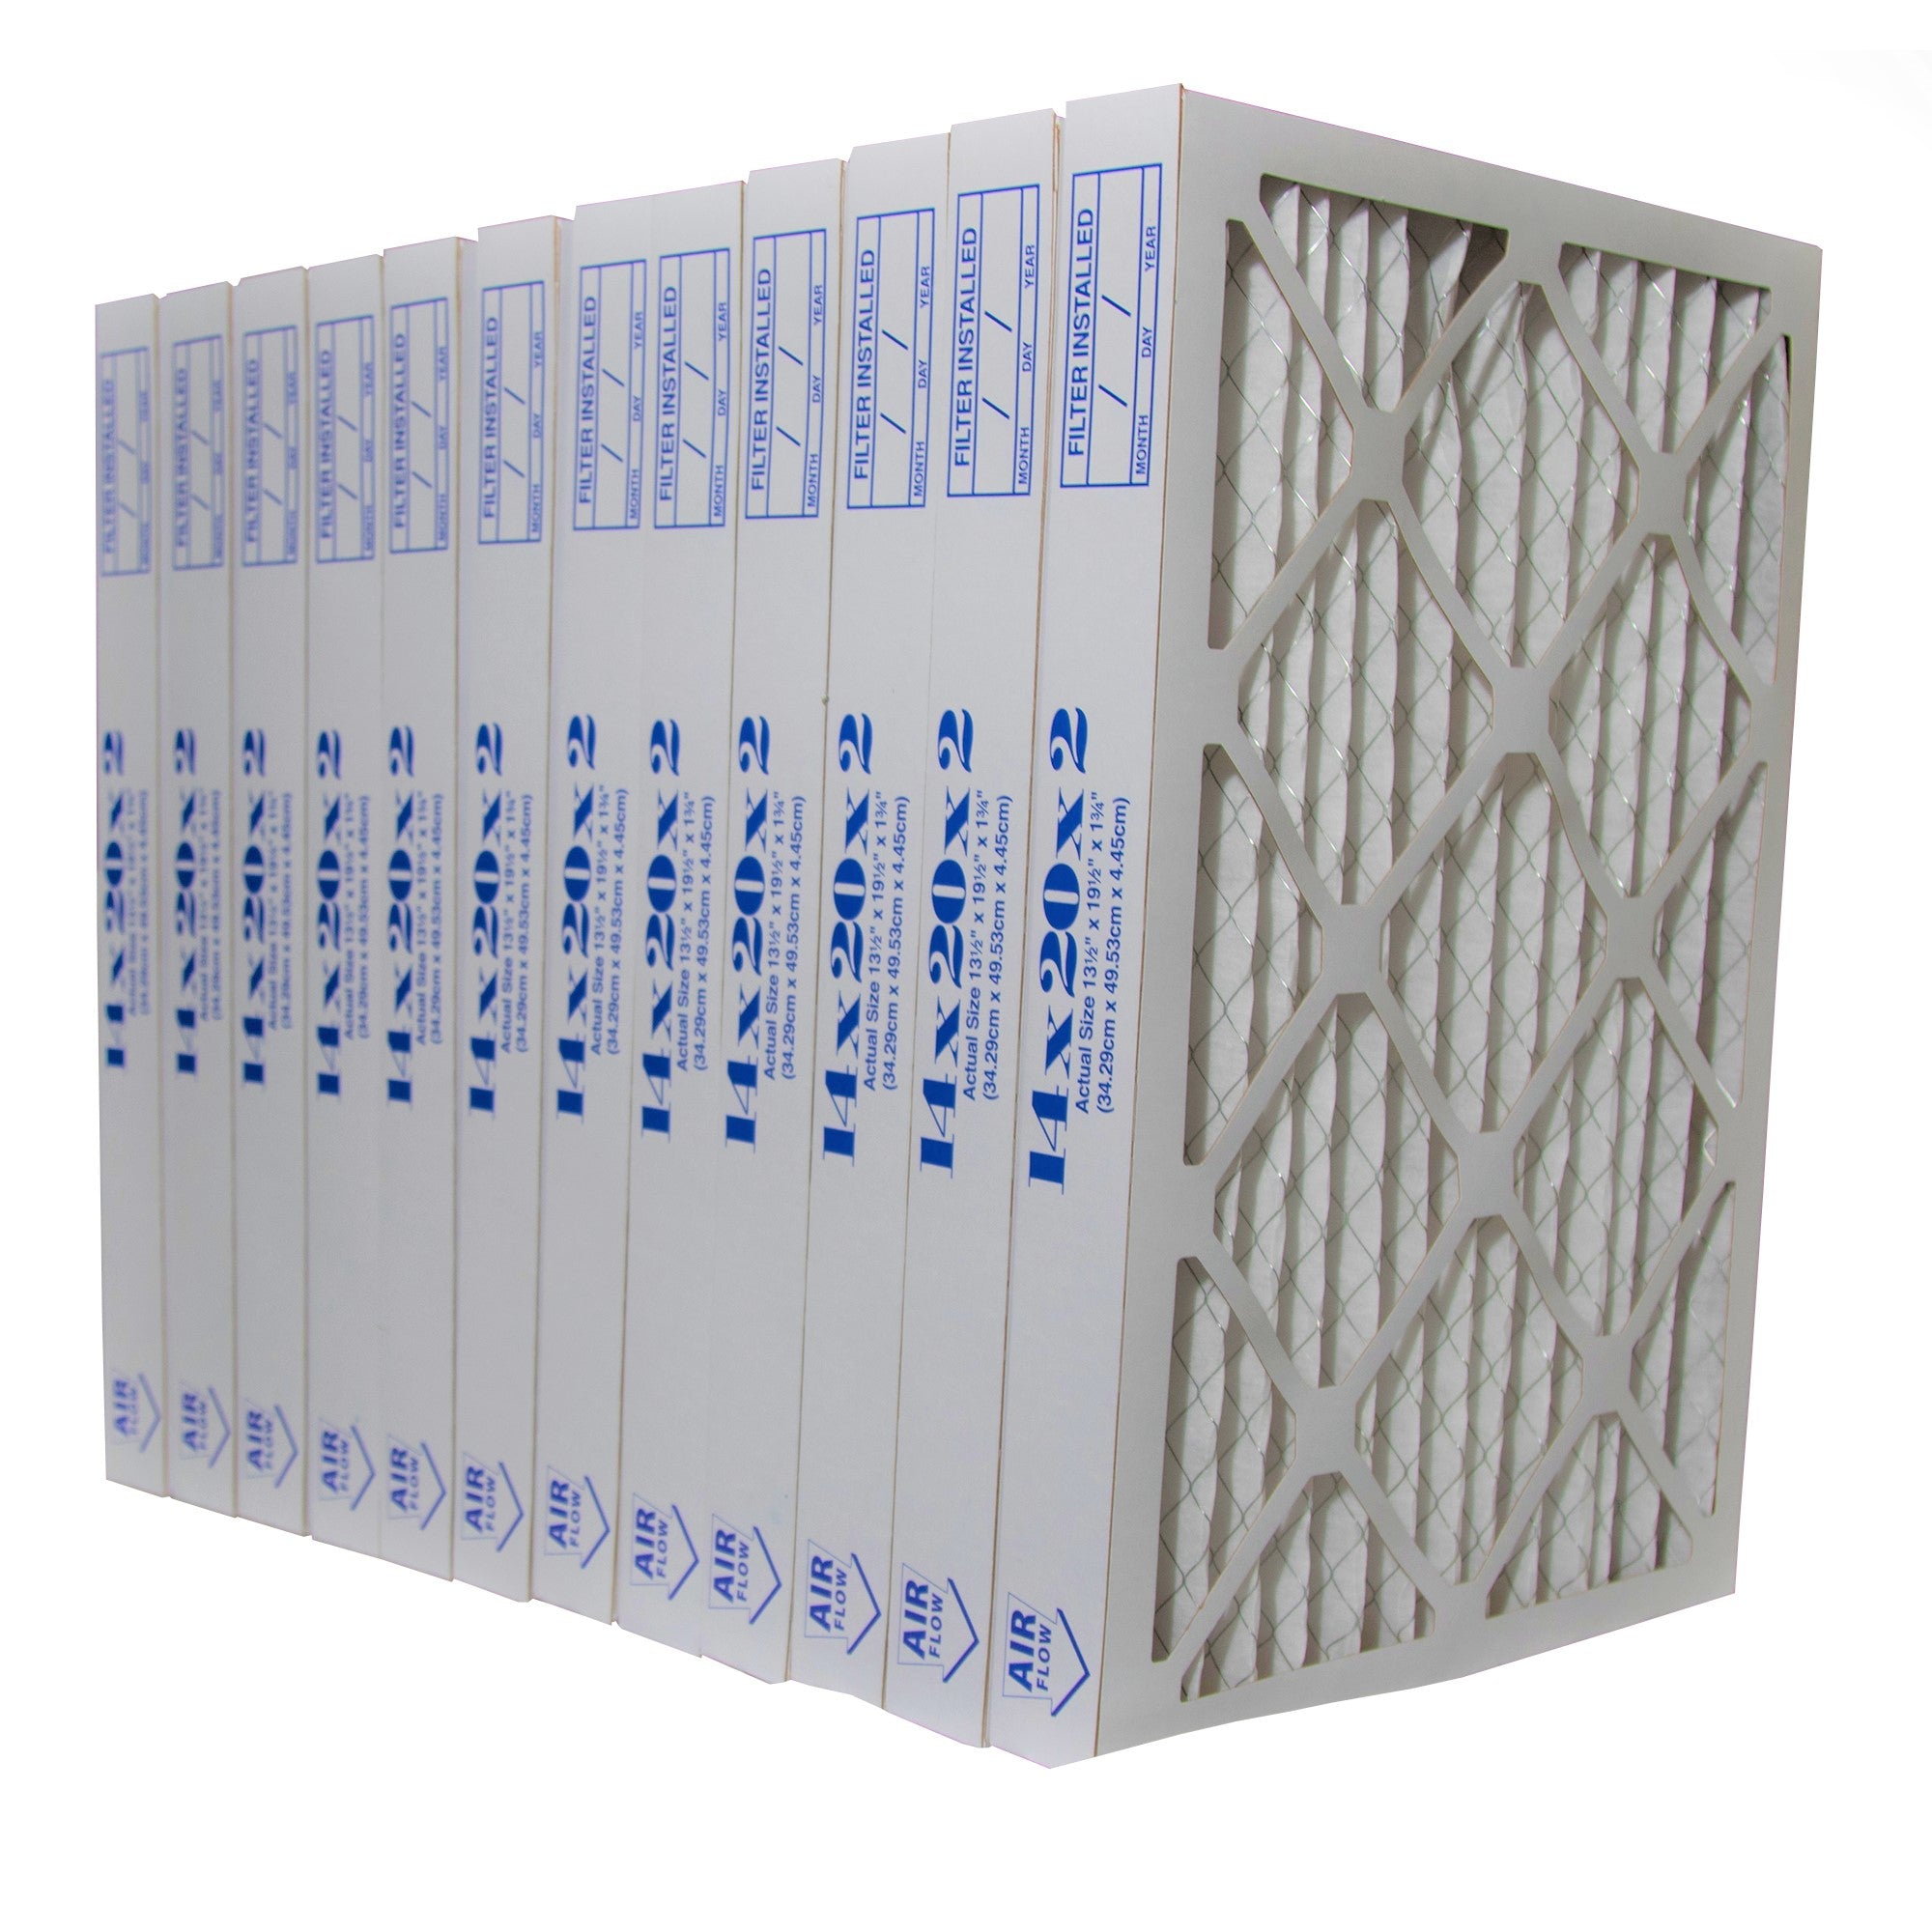 14x20x2 Furnace Filter MERV 8 Pleated Filter. Case of 12